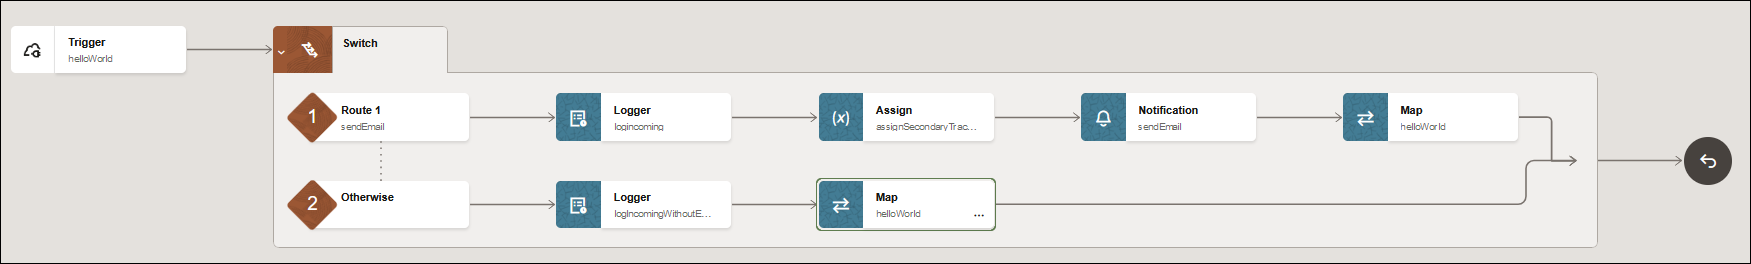 The Trigger connection is shown. The two routes of the Switch actions are then shown. Route 1 shows Logger, Assign, Notification, and Map actions. The Otherwise route shows a Logger action and Map action. A Return action is shown at the far right.